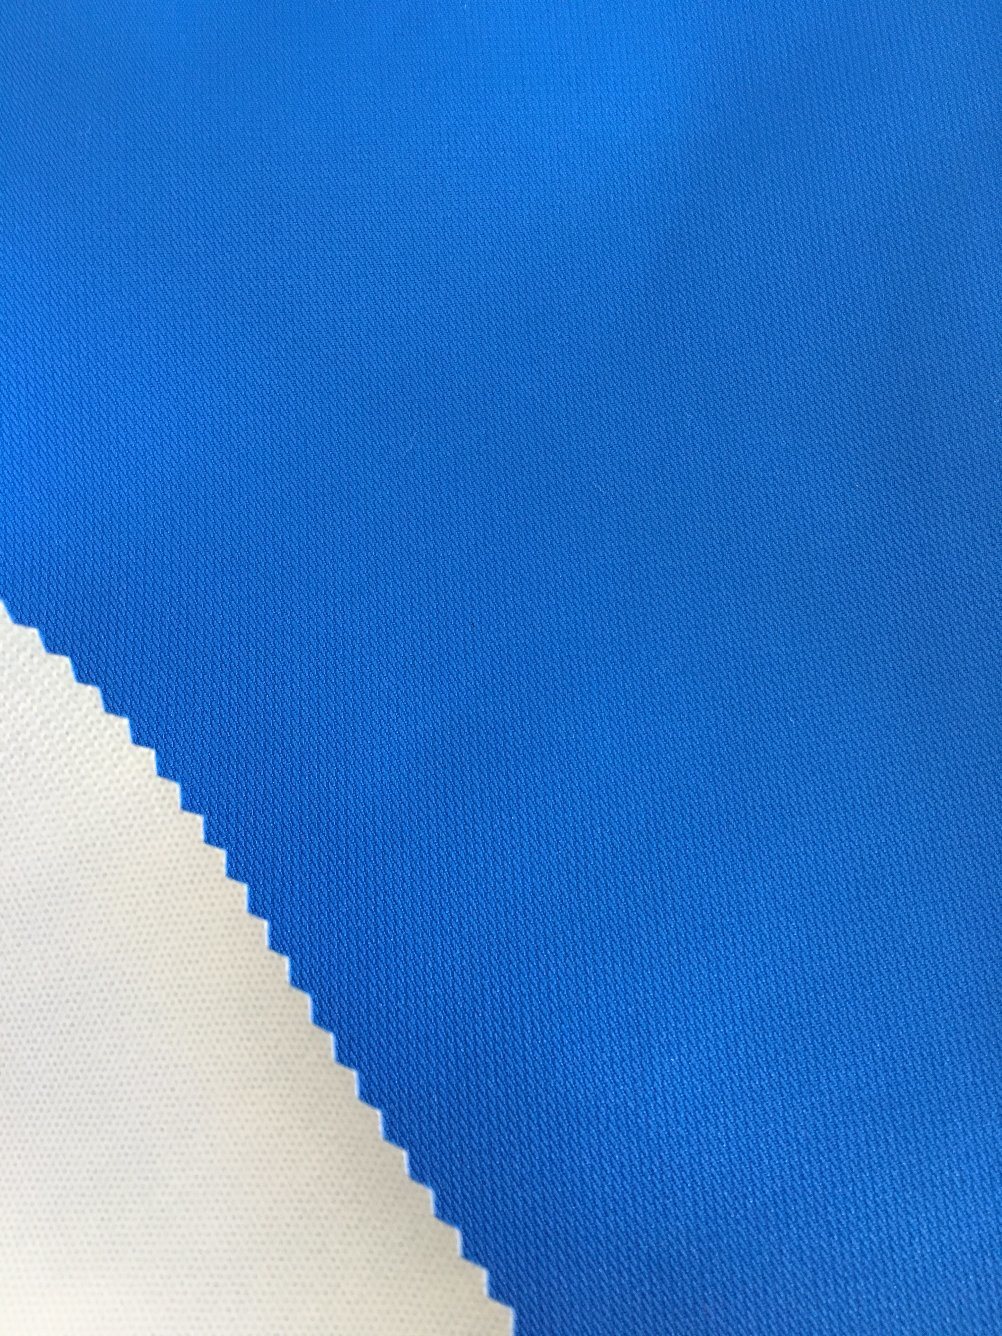 75D*150d 210t Twill Polyester Fabric with TPU 10k/5k Backing for Ski Jackets